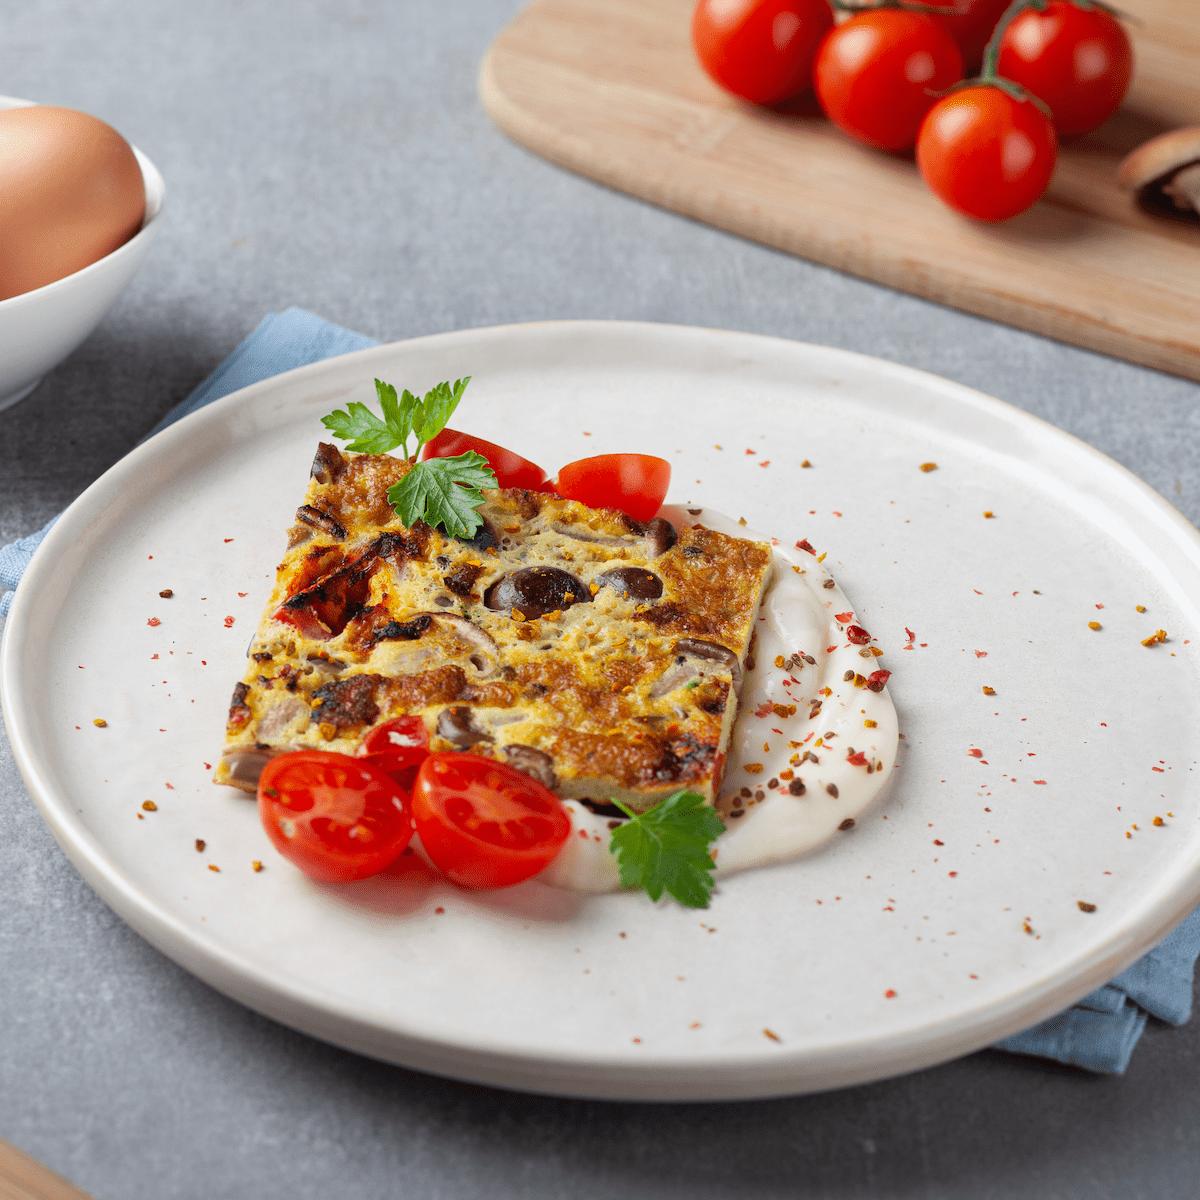 Tomato and mushrooms omelette